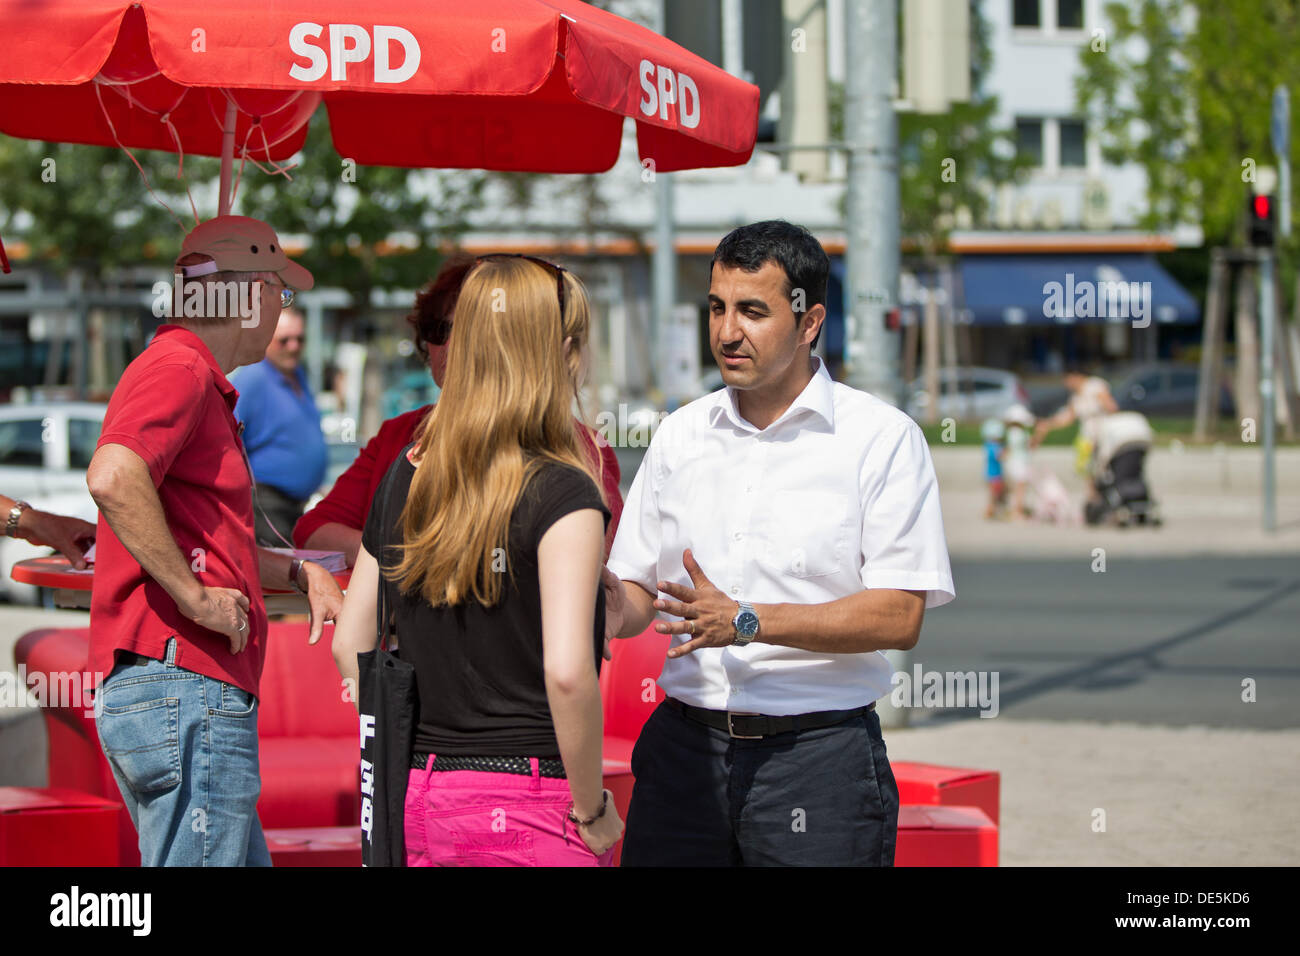 Turkish-born politician Arif Tasdelen talks to a young woman at an election campaign stand of the Social Democratic Party (SPD) in Nuremberg, Germany, 07 September 2013. Photo: Daniel Karmann Stock Photo